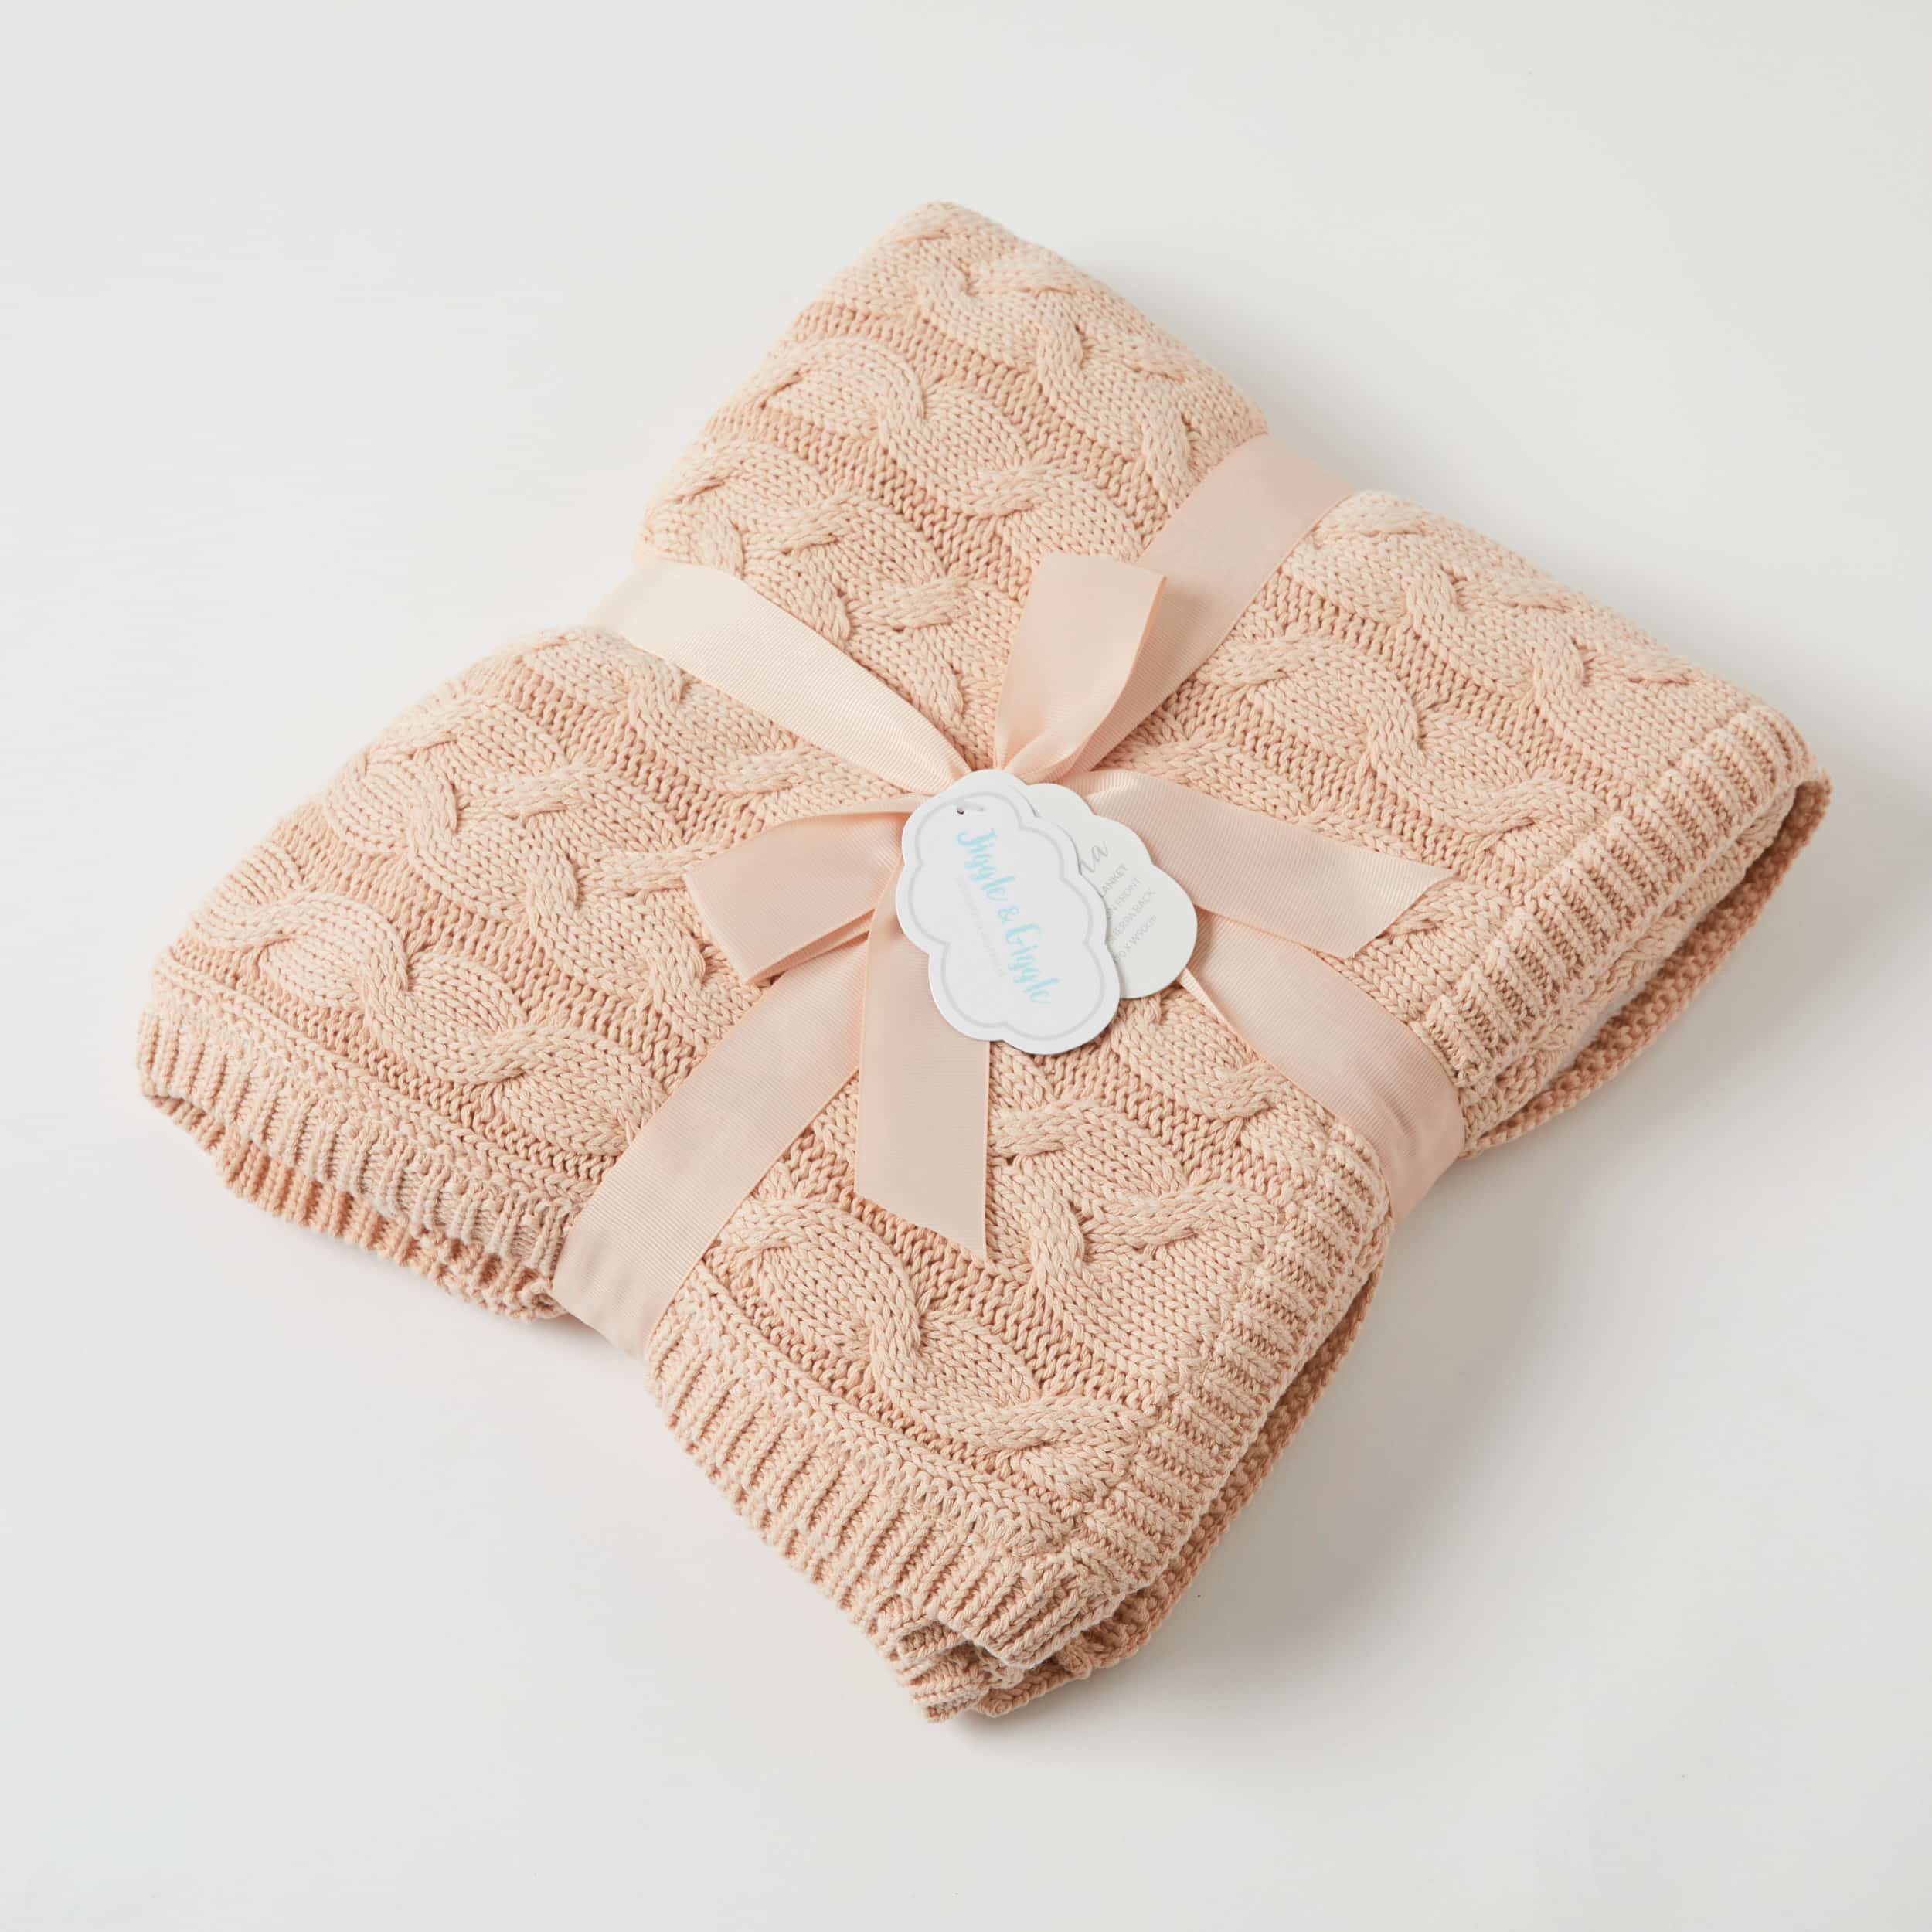 Jiggle & Giggle - Aurora Cable Knit Baby Blanket - Pink